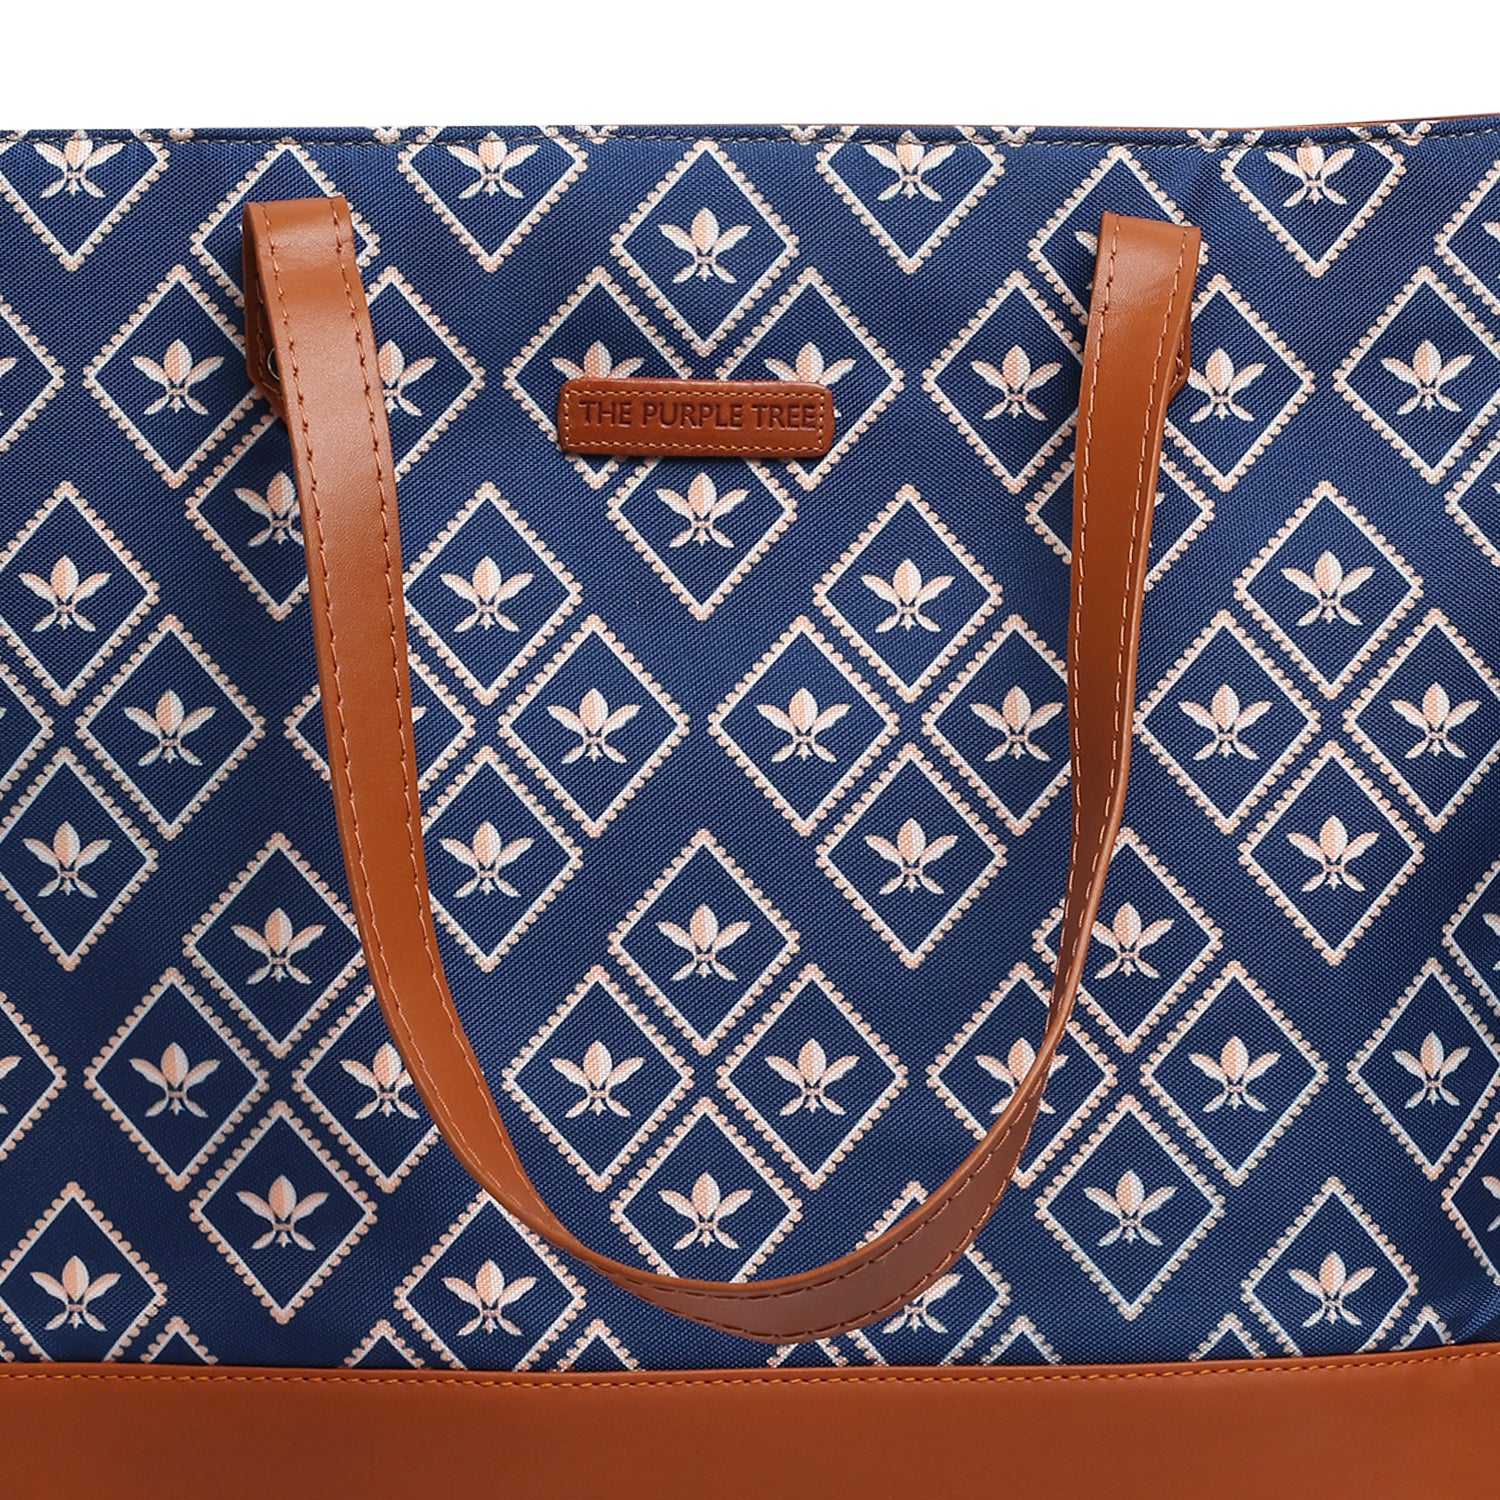 Blue and brown tote bag placed beside a wooden chair